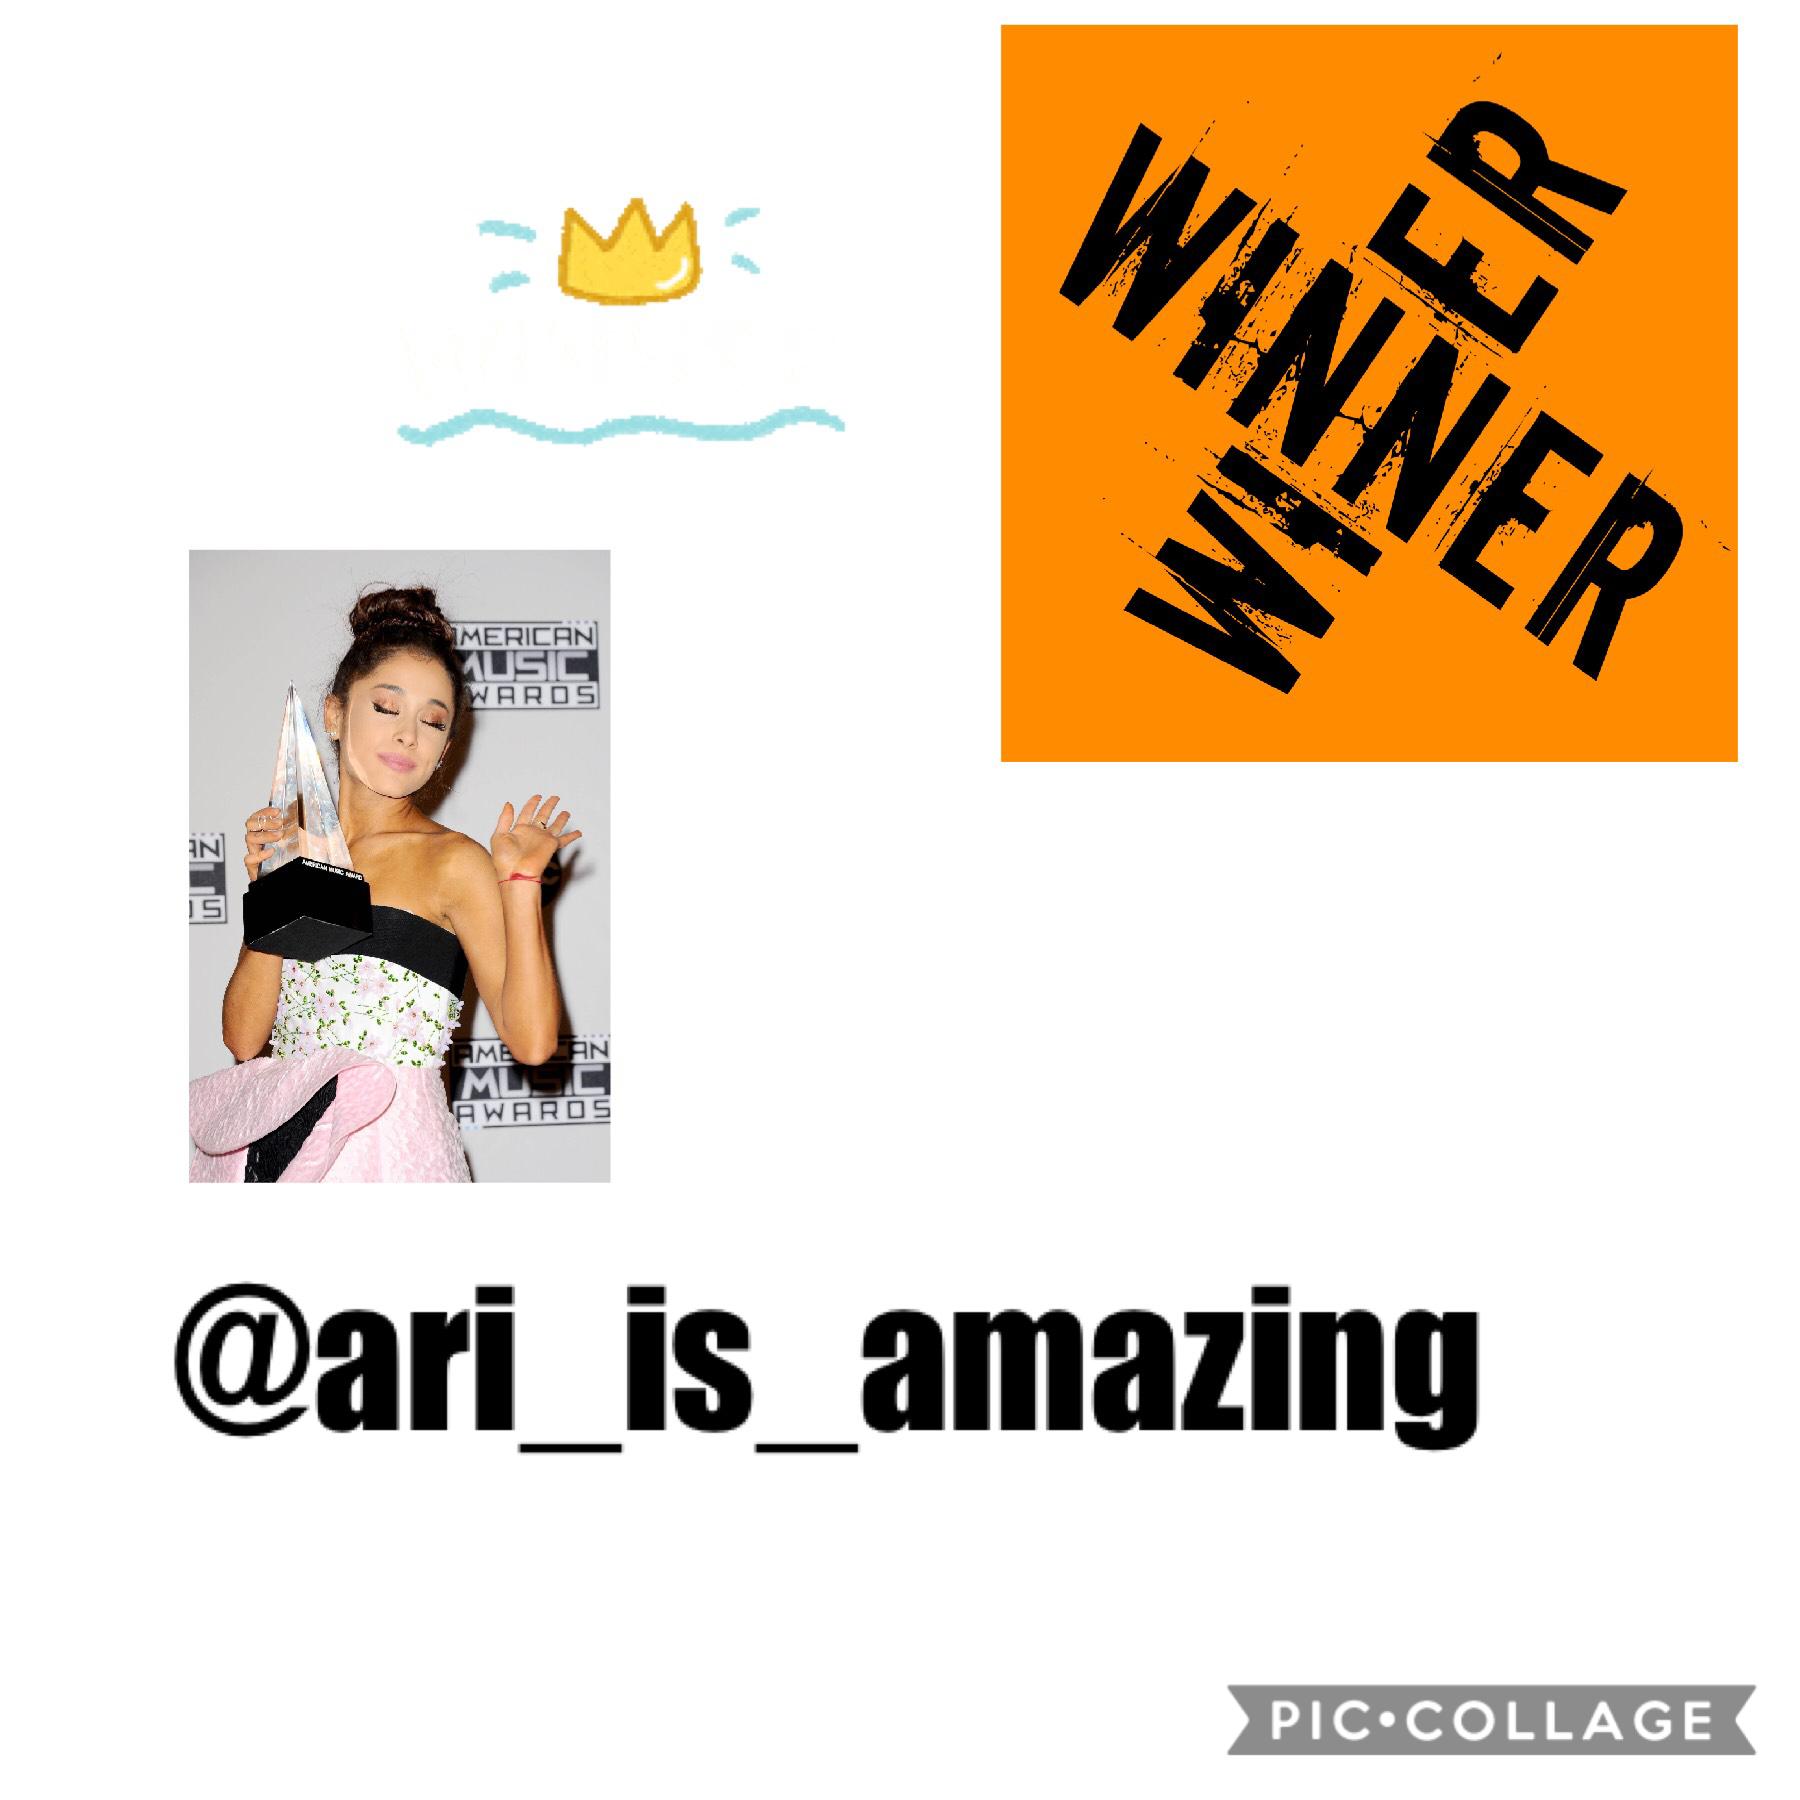 Congratulations to ari is amazing go follow her!
Thank you so much 
